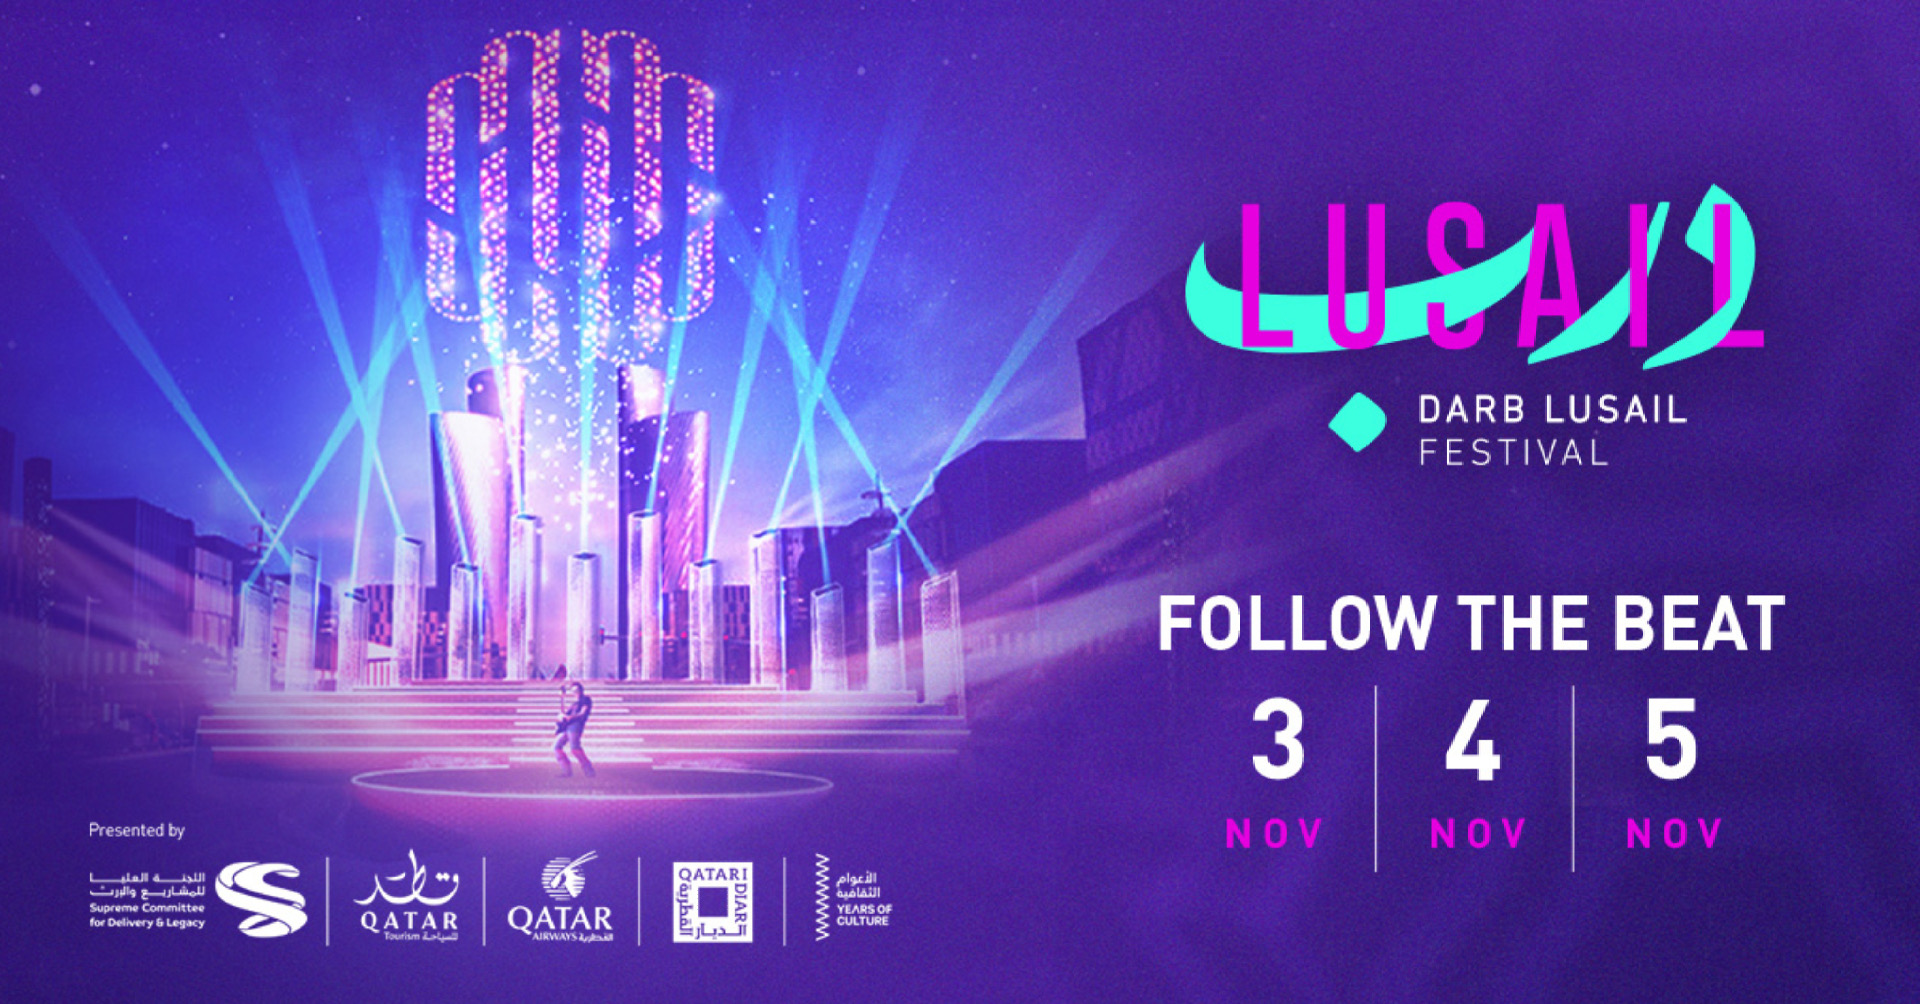 Darb Lusail Festival New In Doha Inspiring You to Explore Qatar